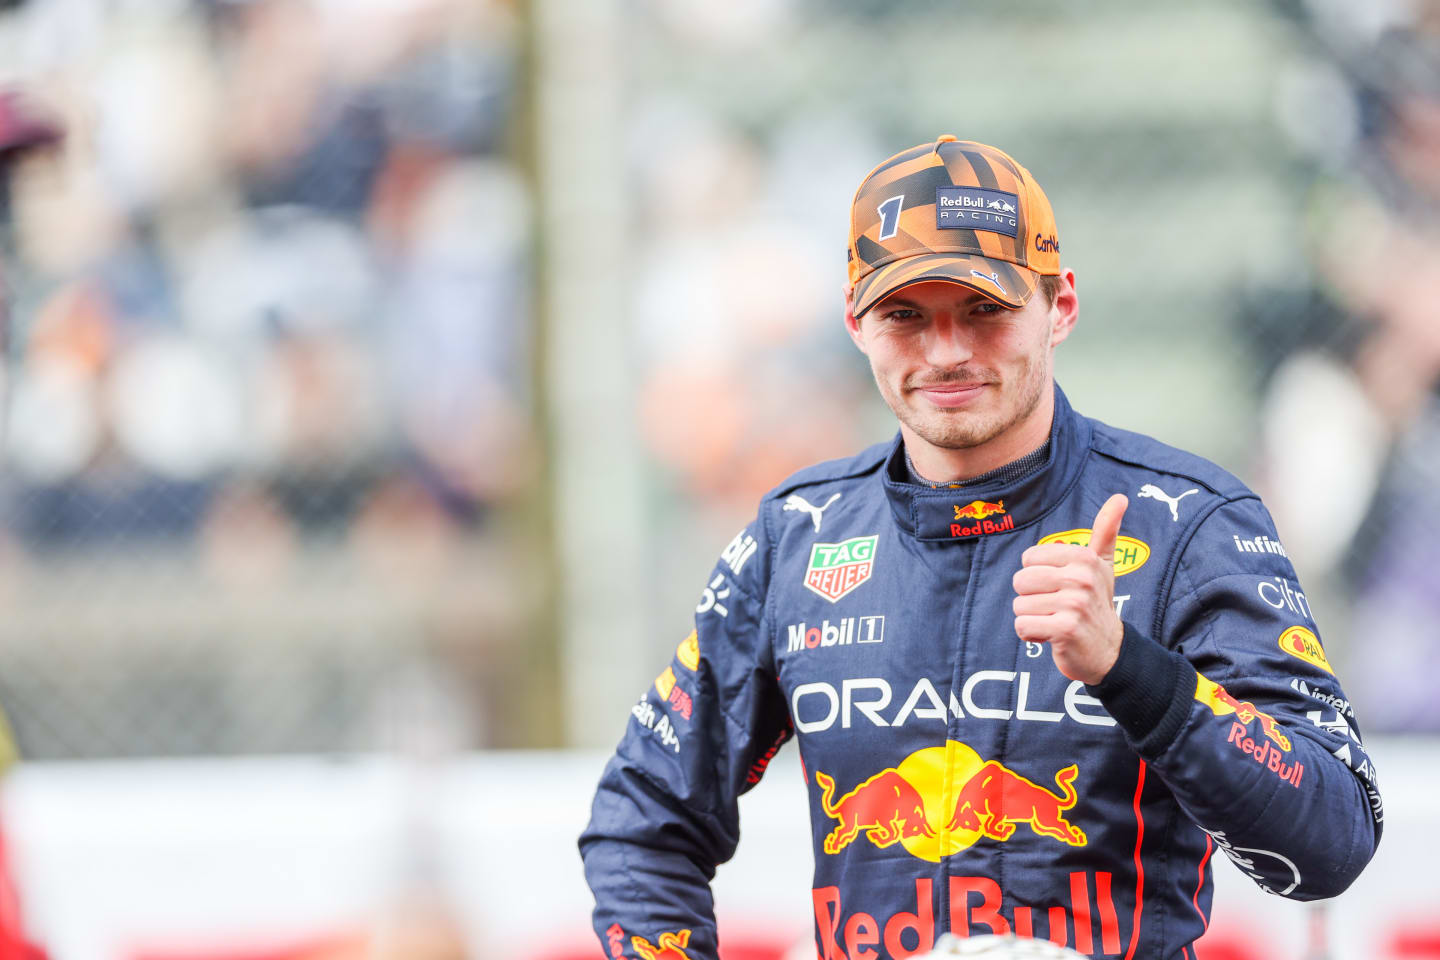 SUZUKA, JAPAN - OCTOBER 08: Max Verstappen of Red Bull Racing and The Netherlands  during qualifying ahead of the F1 Grand Prix of Japan at Suzuka International Racing Course on October 08, 2022 in Suzuka, Japan. (Photo by Peter Fox/Getty Images )